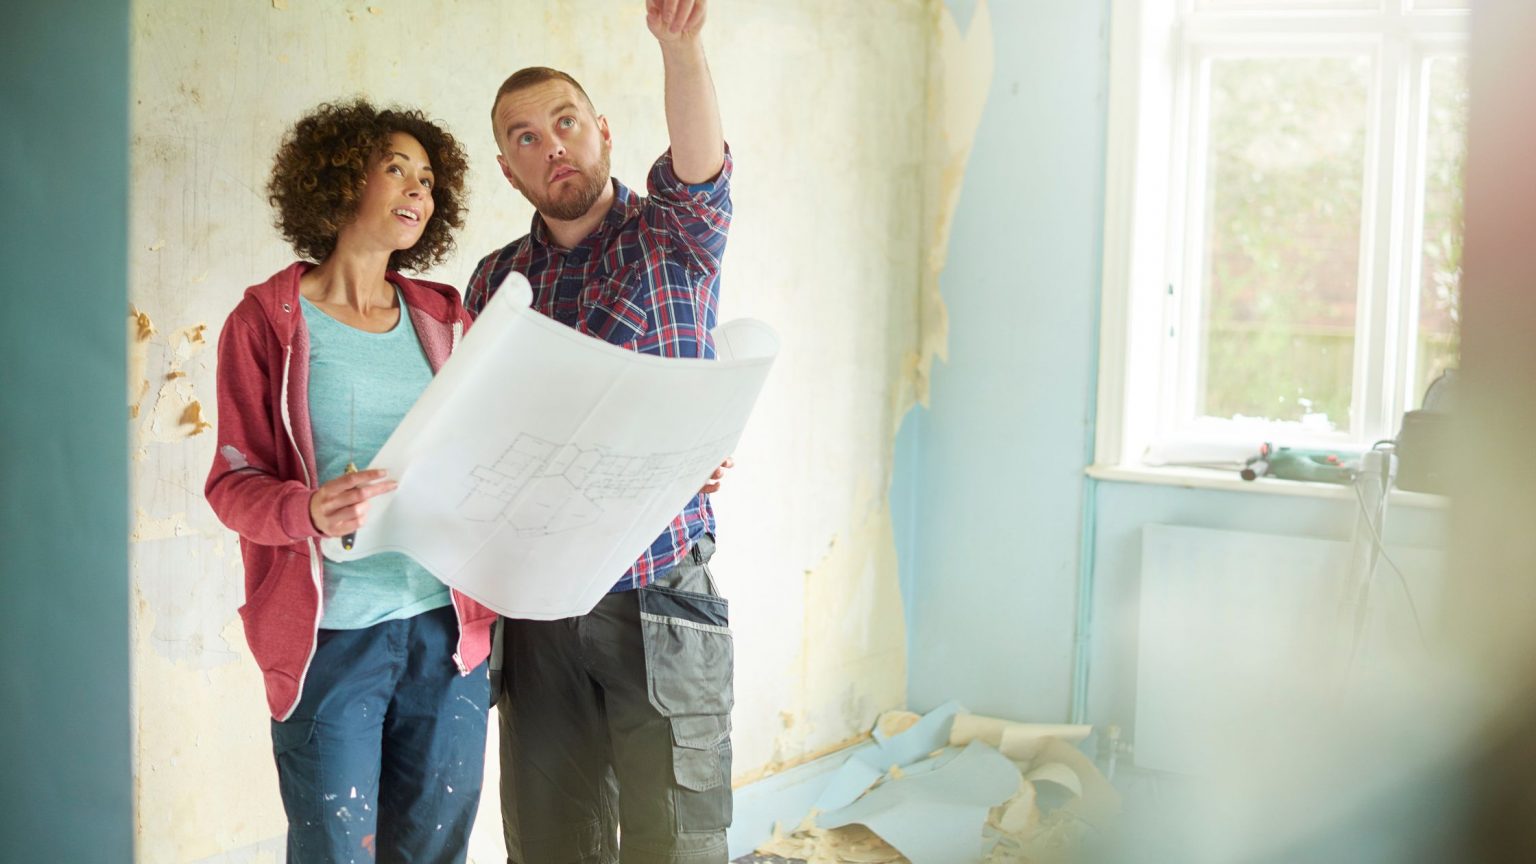 Home equity line of credit using home equity for home renovations and remodeling projects.